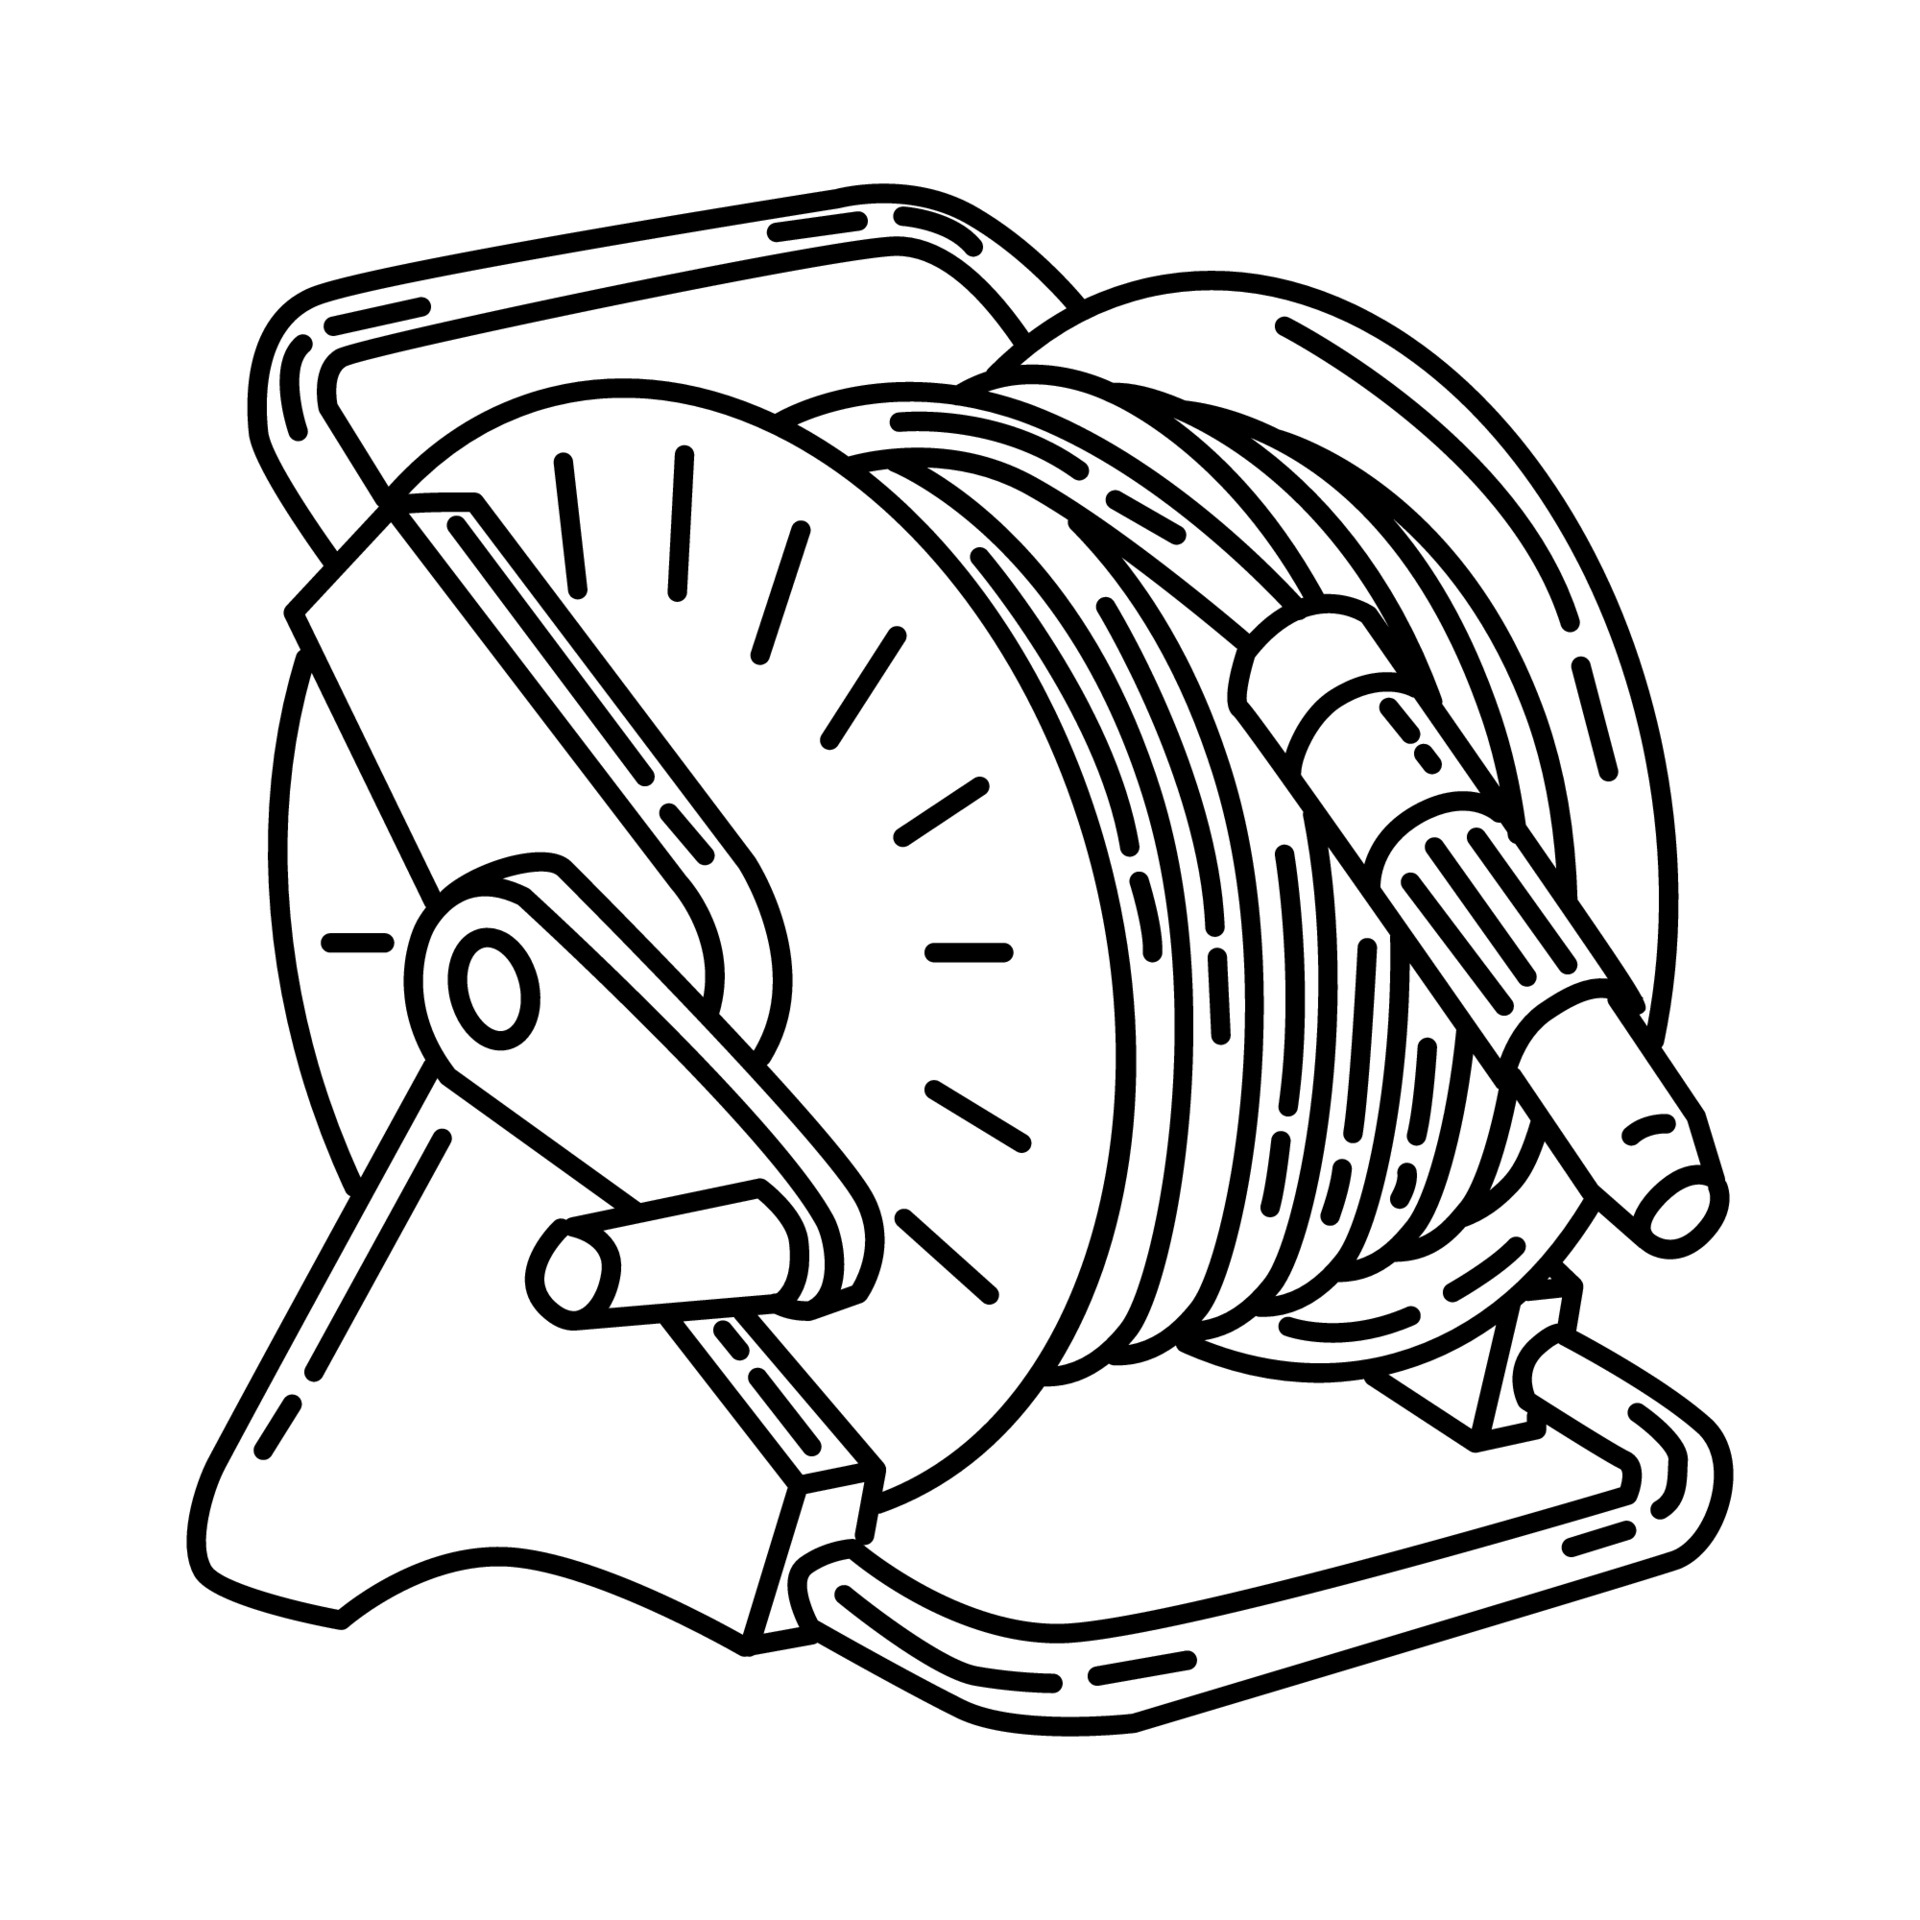 Fire Hose Reel Line Vector & Photo (Free Trial)